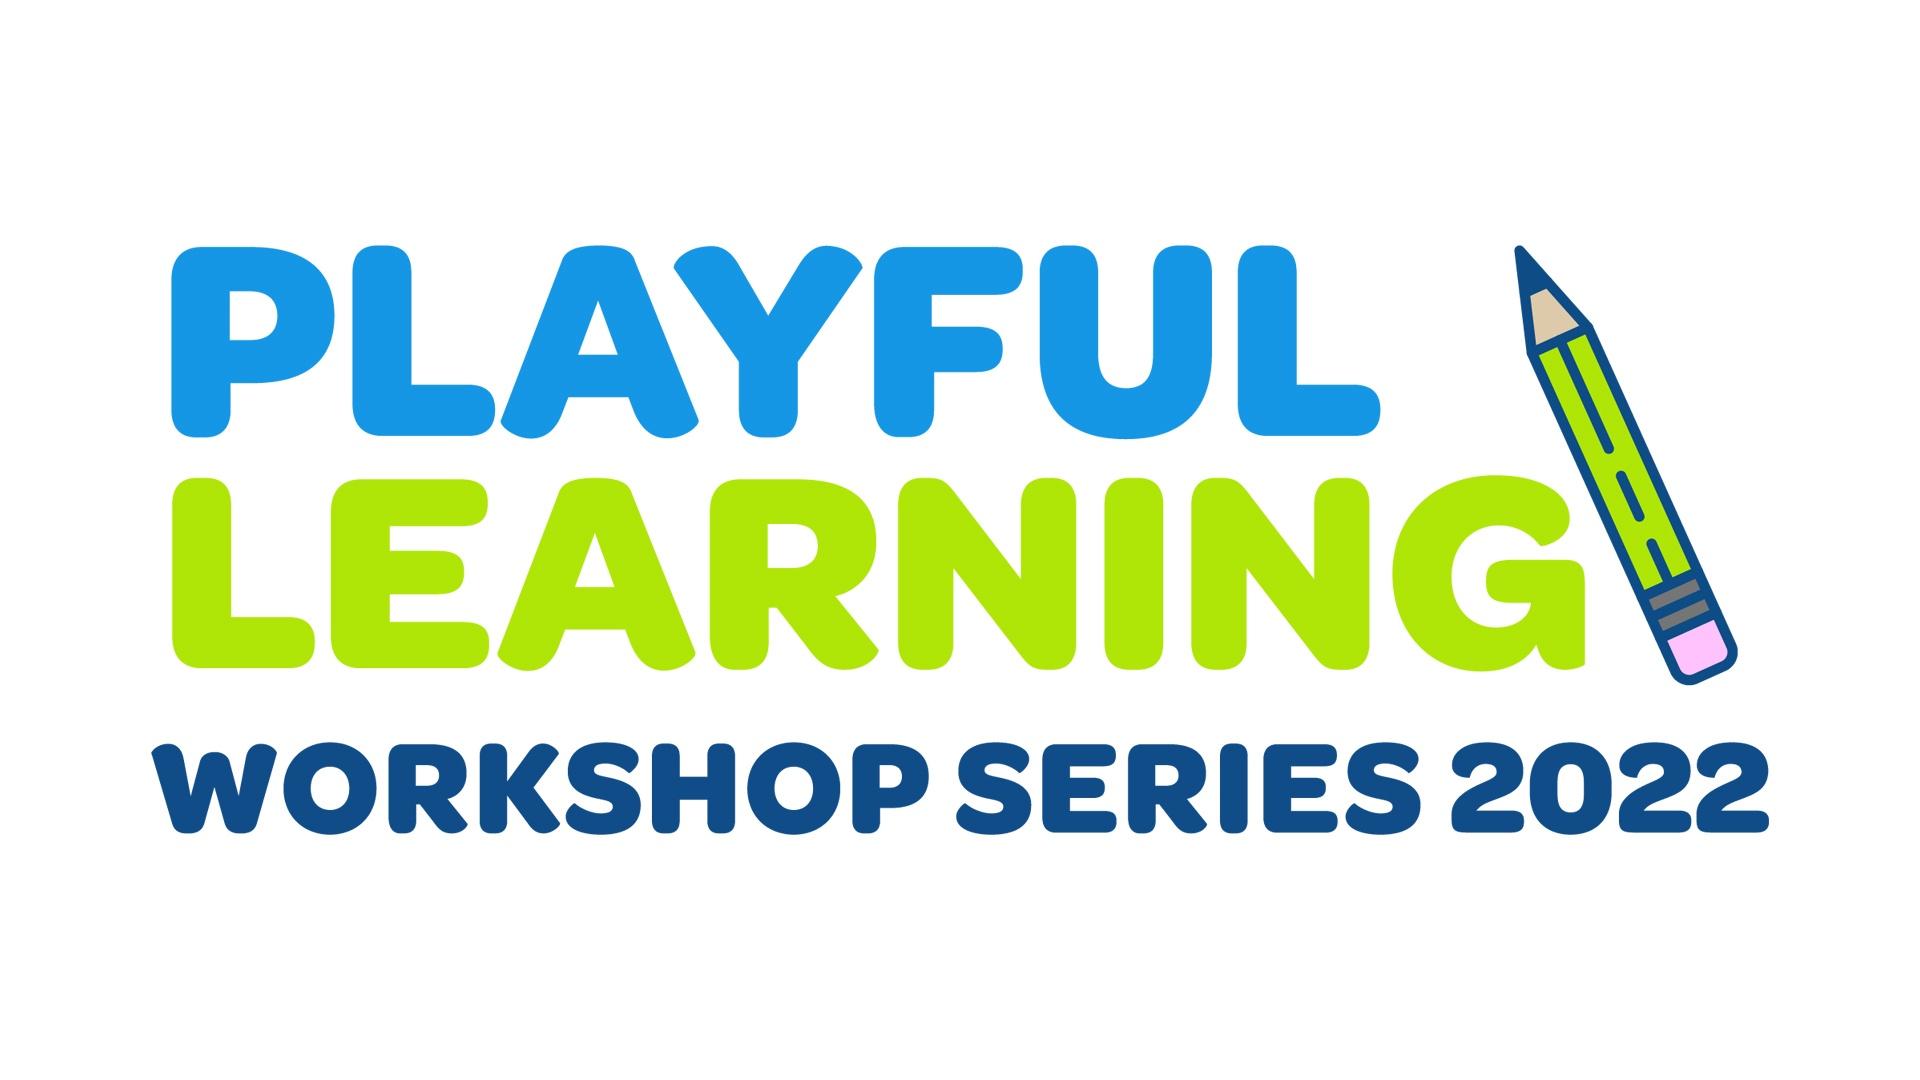 Playful Learning Workshop Series 2022 in blue and green text